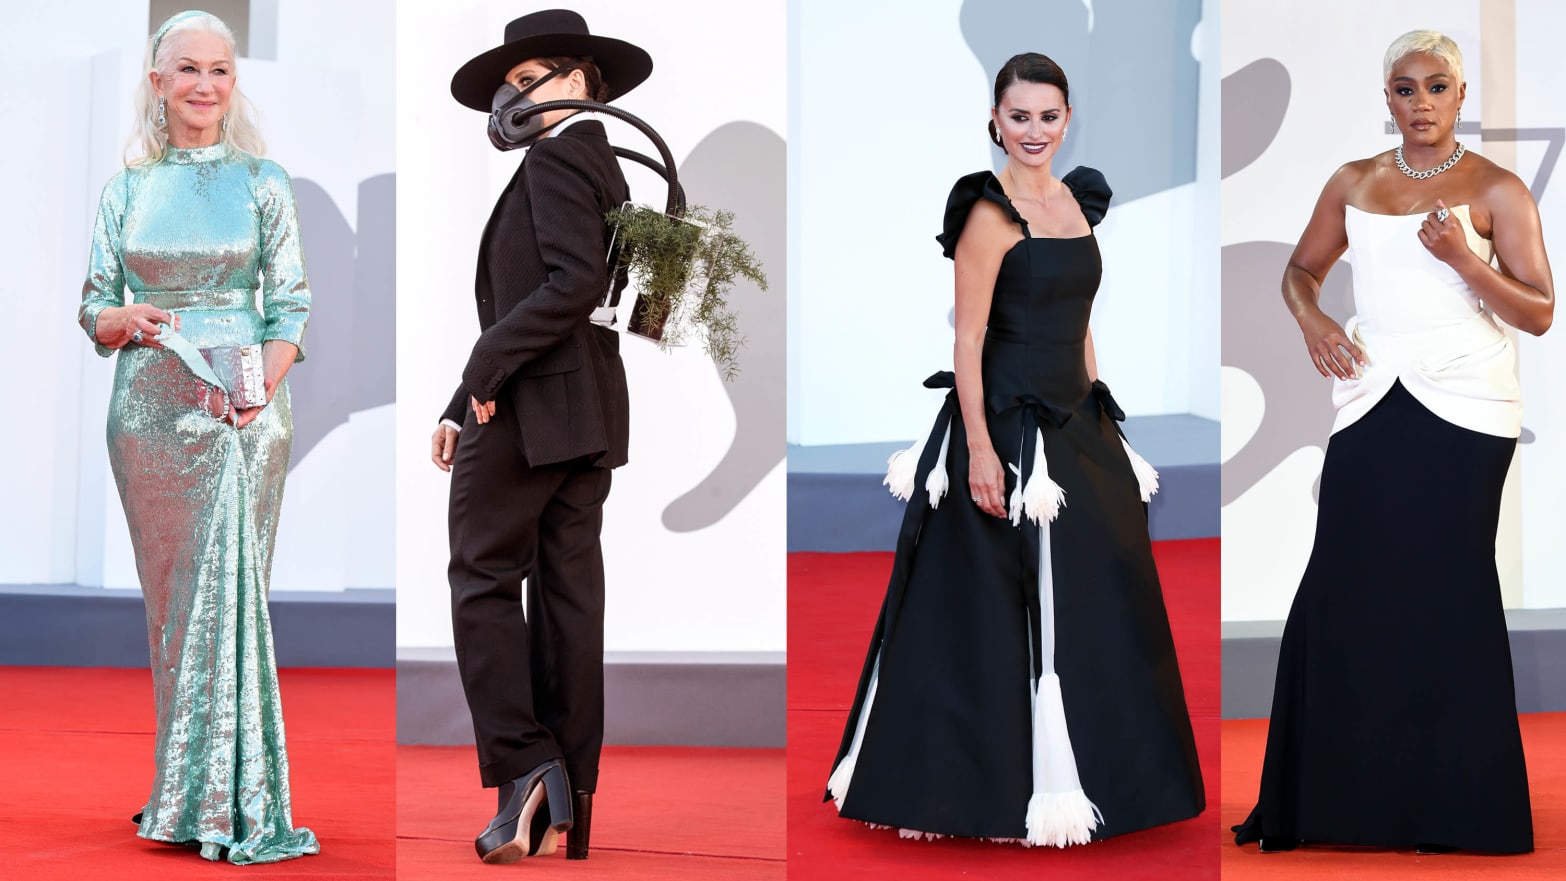 The Venice Film Festival Red Carpet Is Ridiculously, Fabulously Glamorous